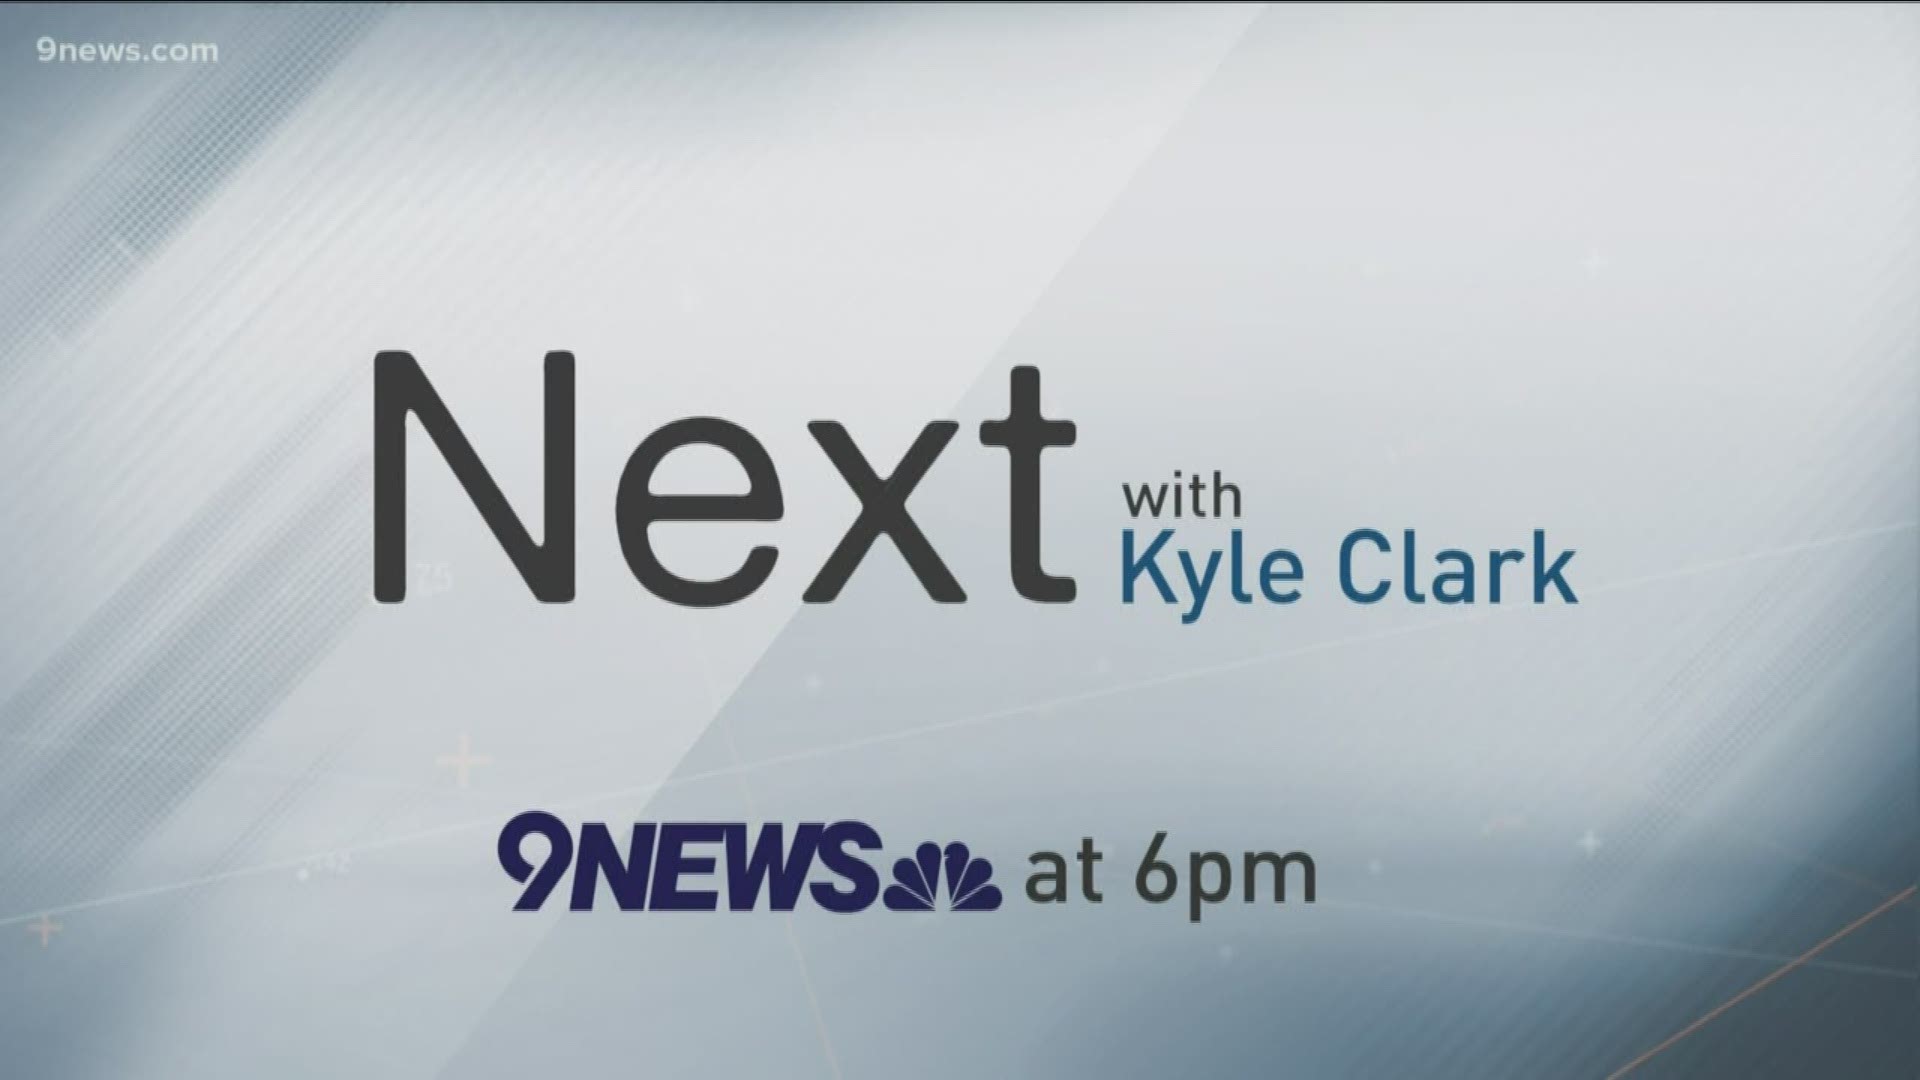 Watch this full episode of Next with Kyle Clark. 9NEWS at 6 p.m. 11/11/19.